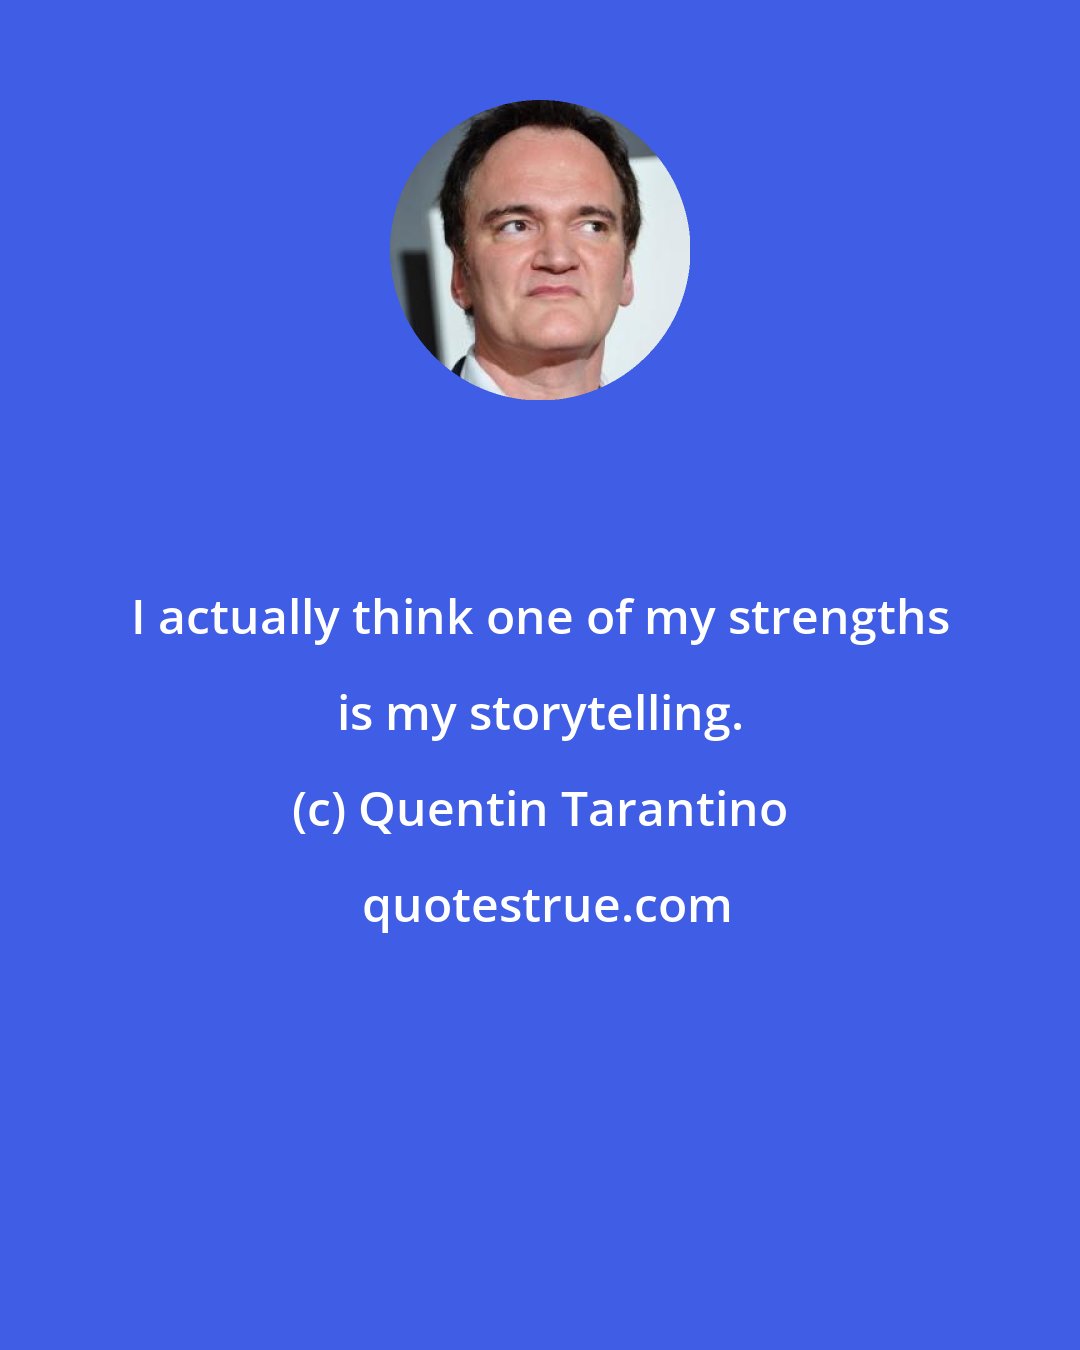 Quentin Tarantino: I actually think one of my strengths is my storytelling.